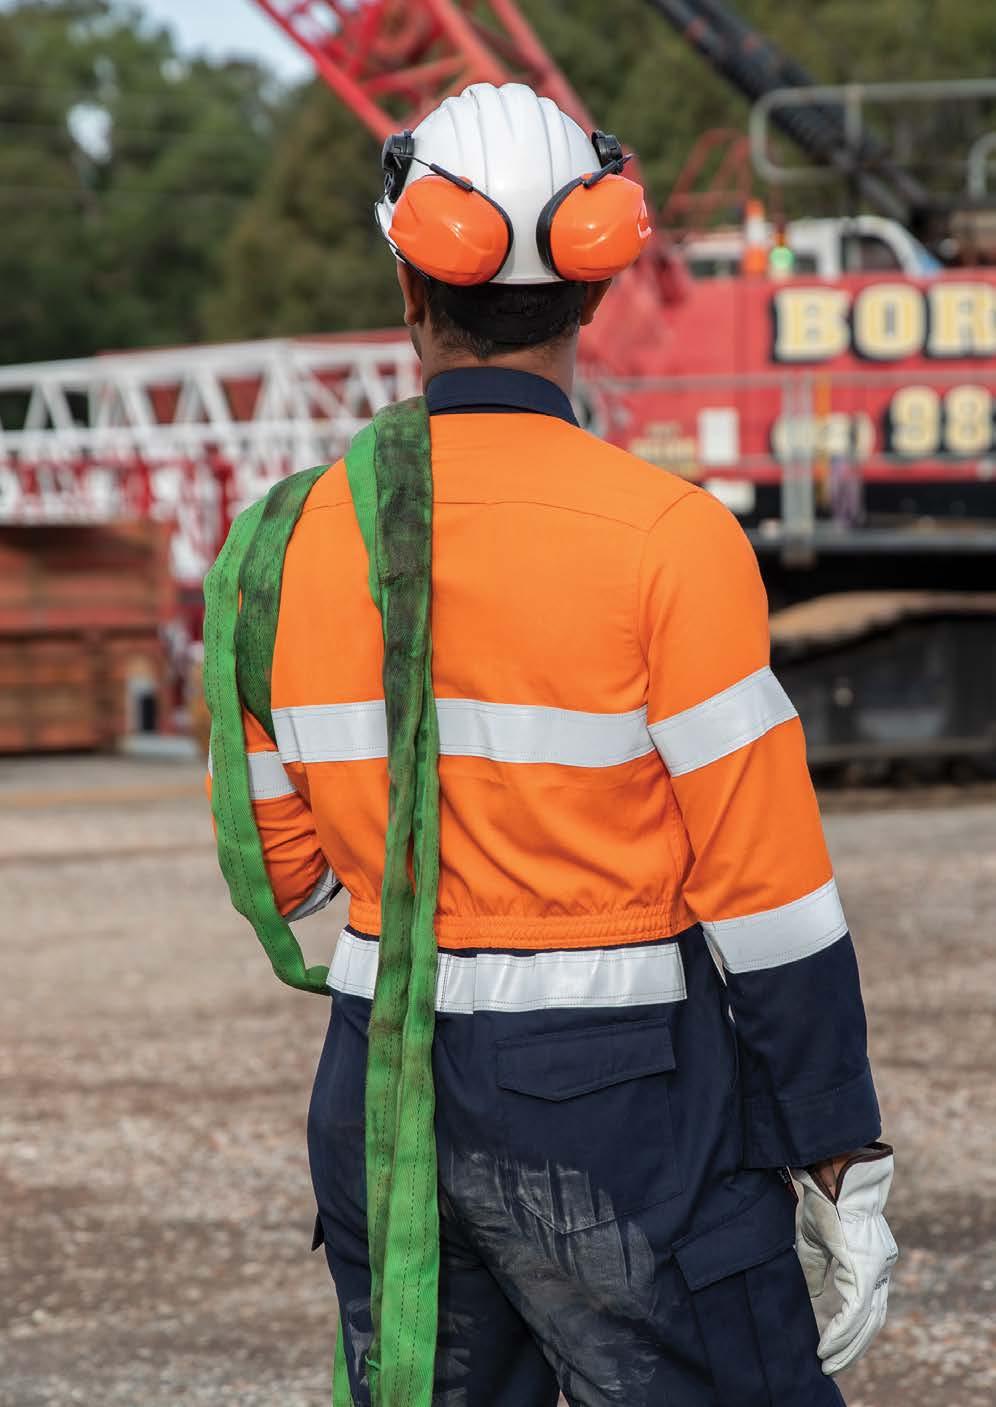 loss. At Bunzl Safety we supply the latest ear muffs, earplugs and dispensers suited to low and high noise environments - from all the